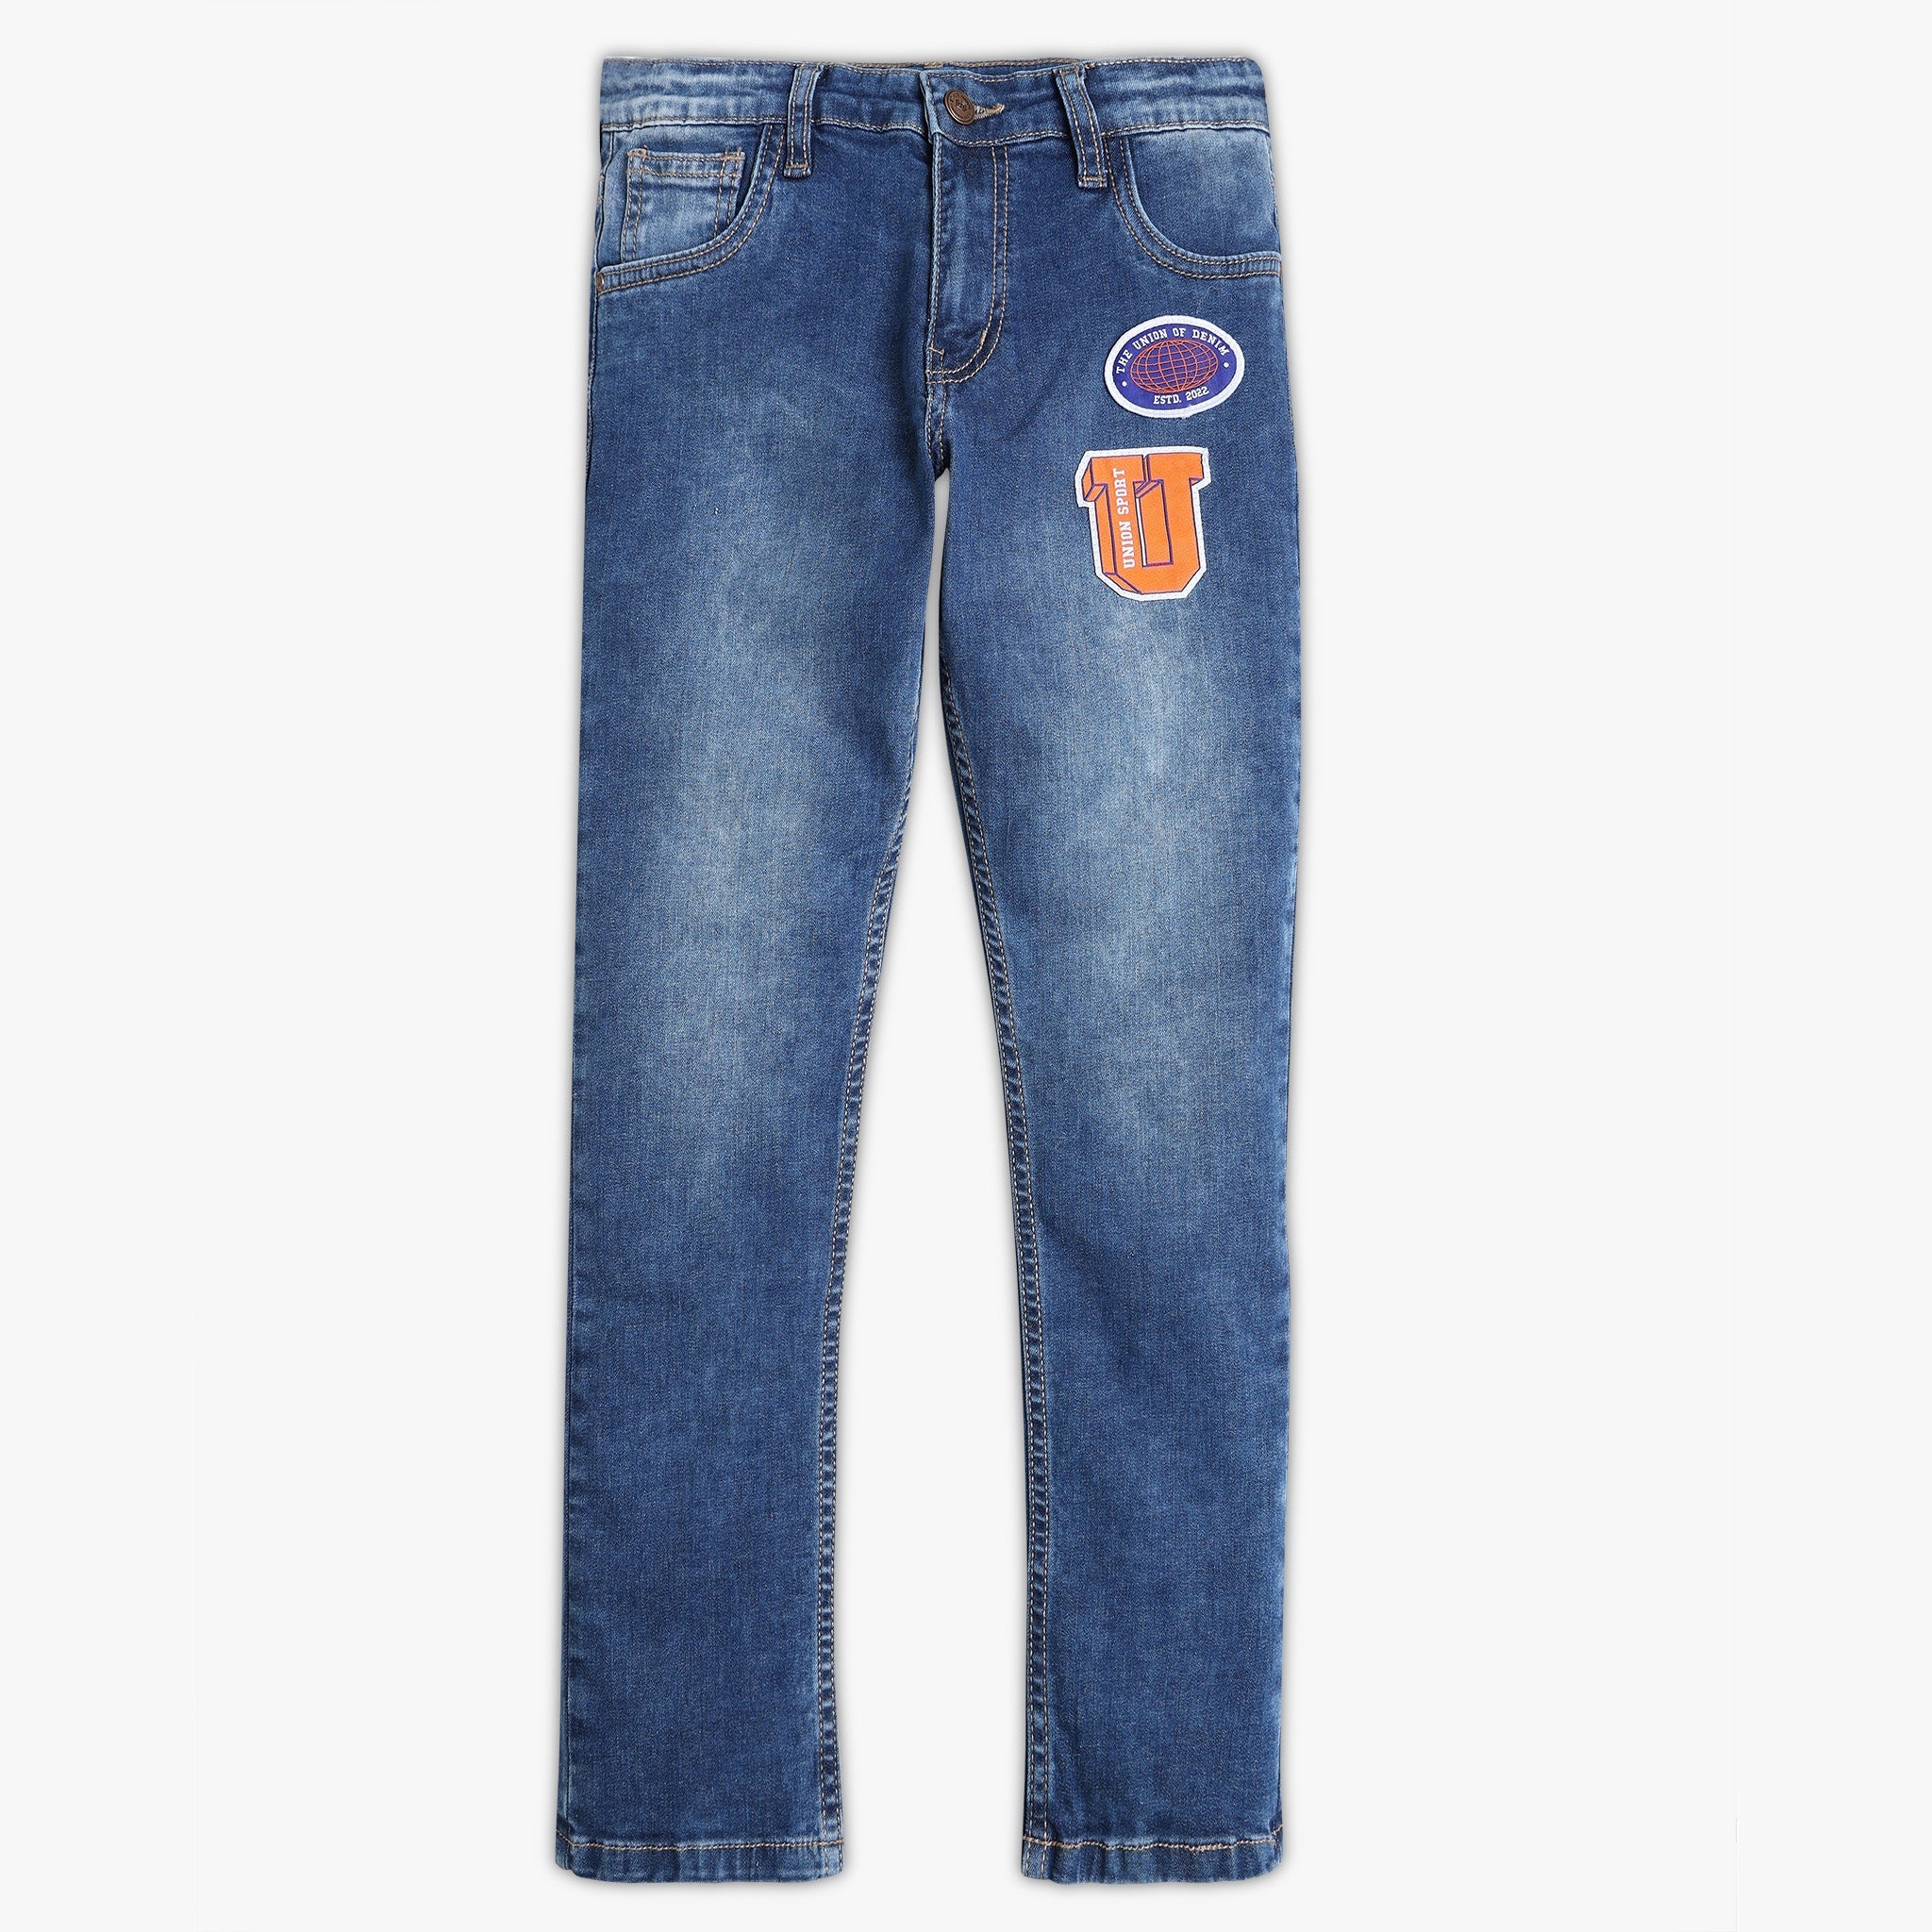 Boys Regular Fit Solid Mid Rise Jeans